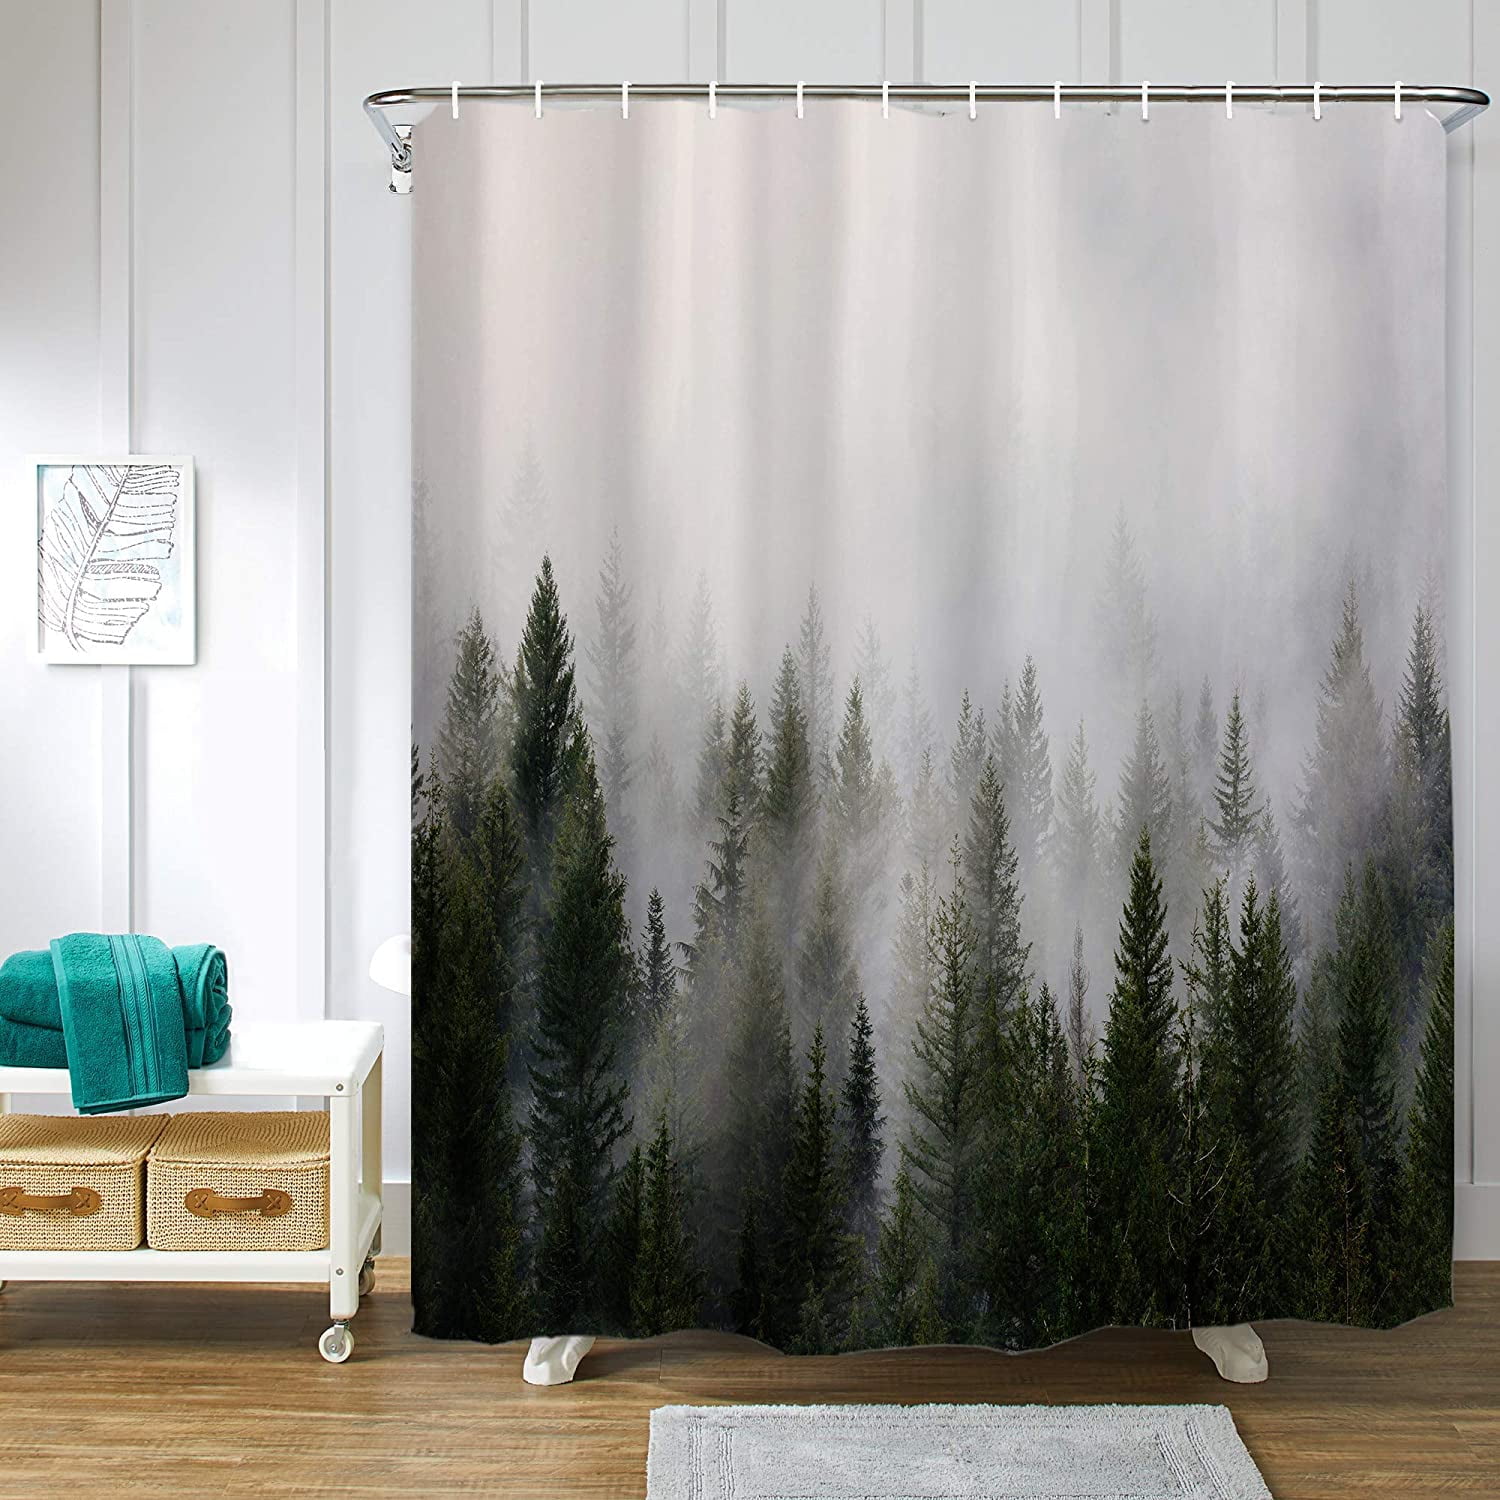 Misty Forest Shower Curtain for Bathroom Fall Nature Woodland Landscape Shower Curtain Sets Fantasy Fog Magic Tree Fabric Bath Curtain Decor Waterproof with Hooks 72x72 